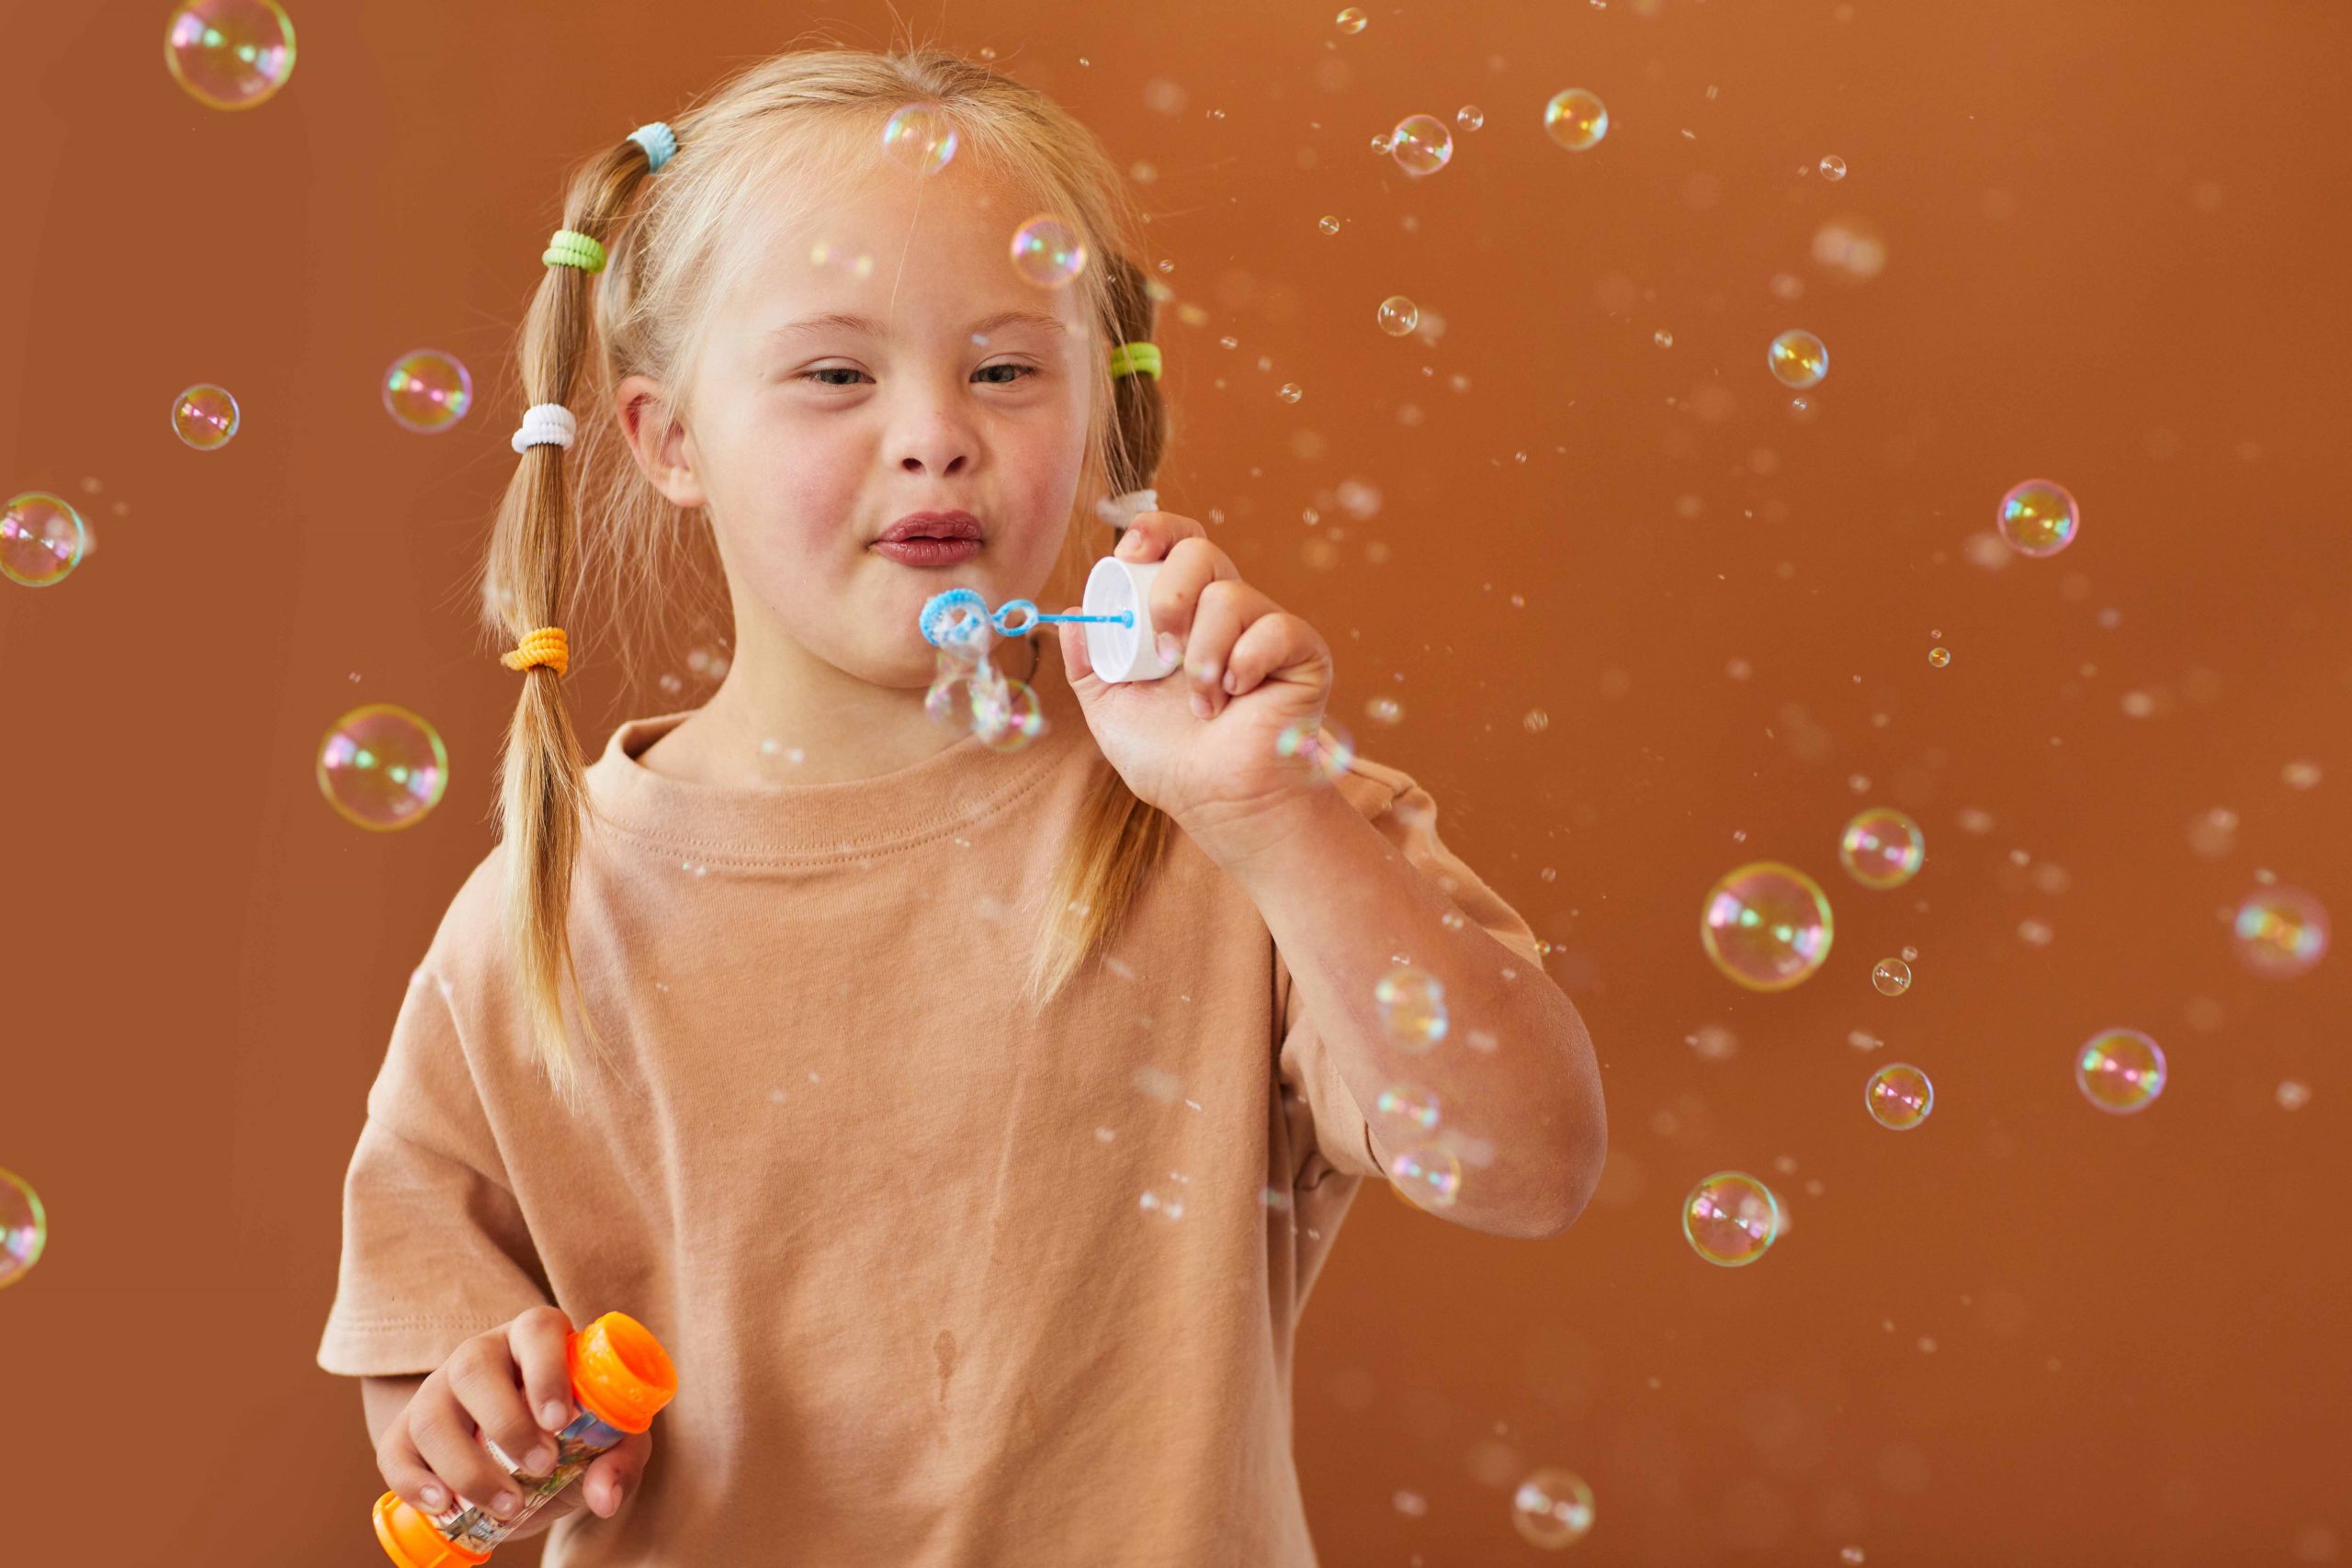 Waist up portrait of cute girl with down syndrome blowing bubbles while posing against brown background in studio, copy space